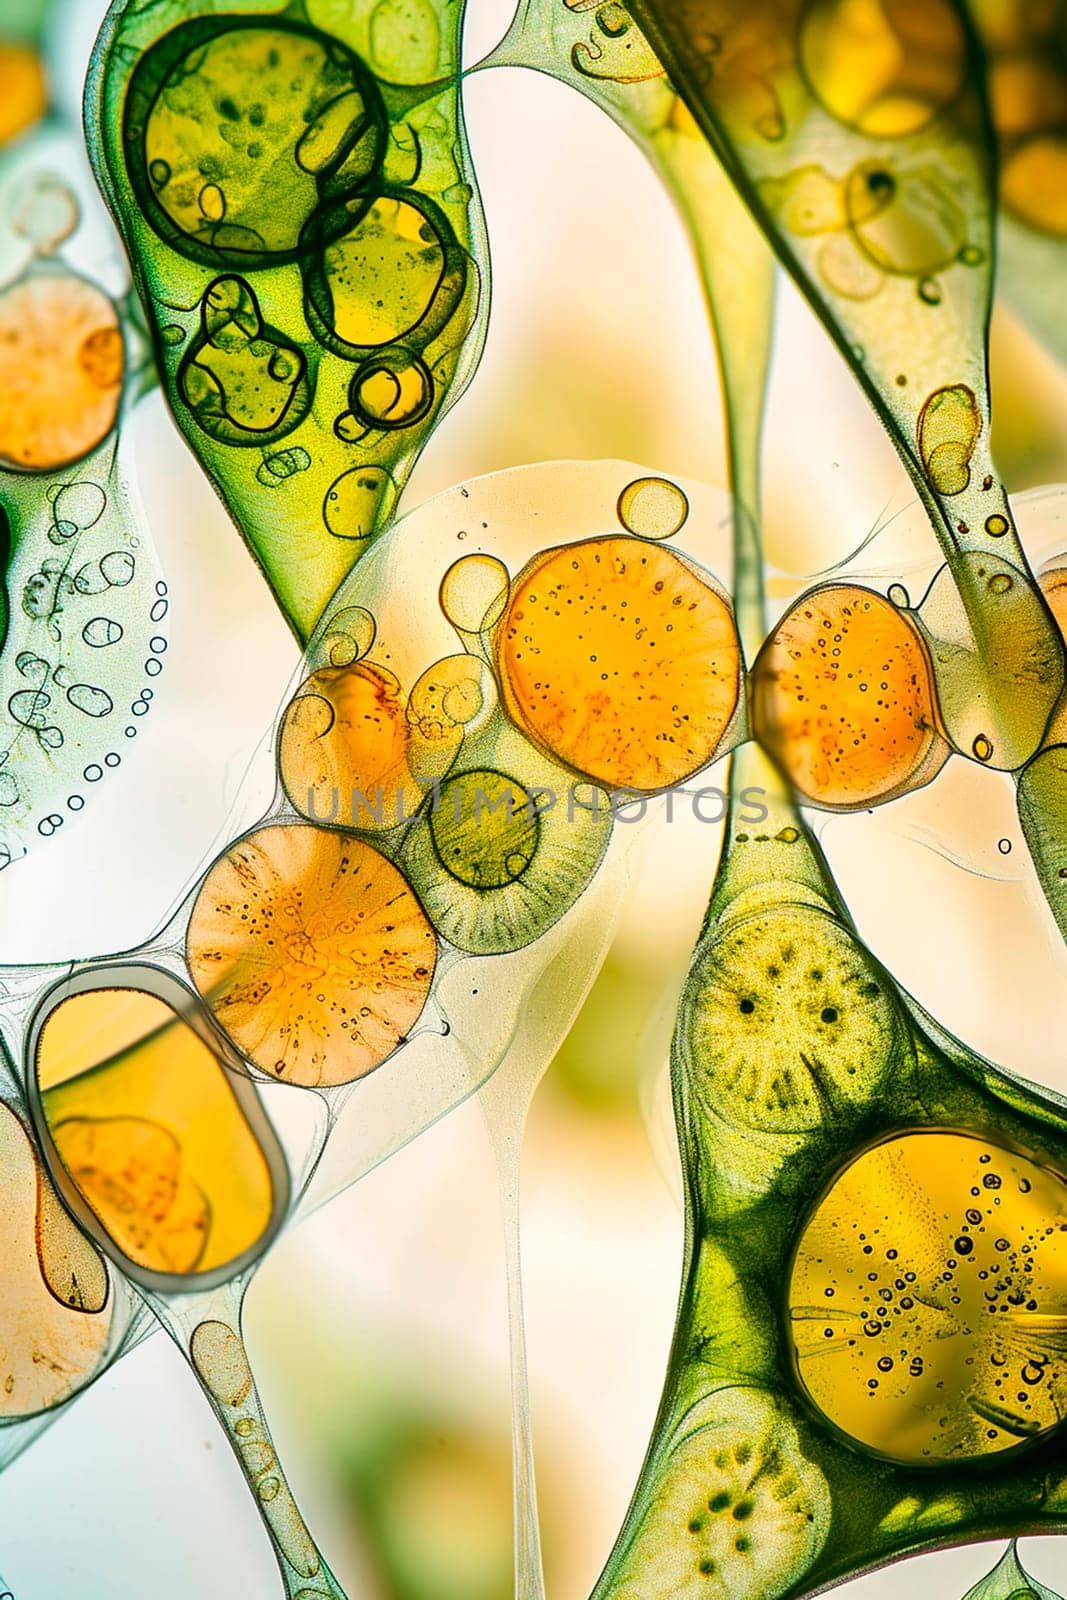 Cell under a microscope. Selective focus. by yanadjana